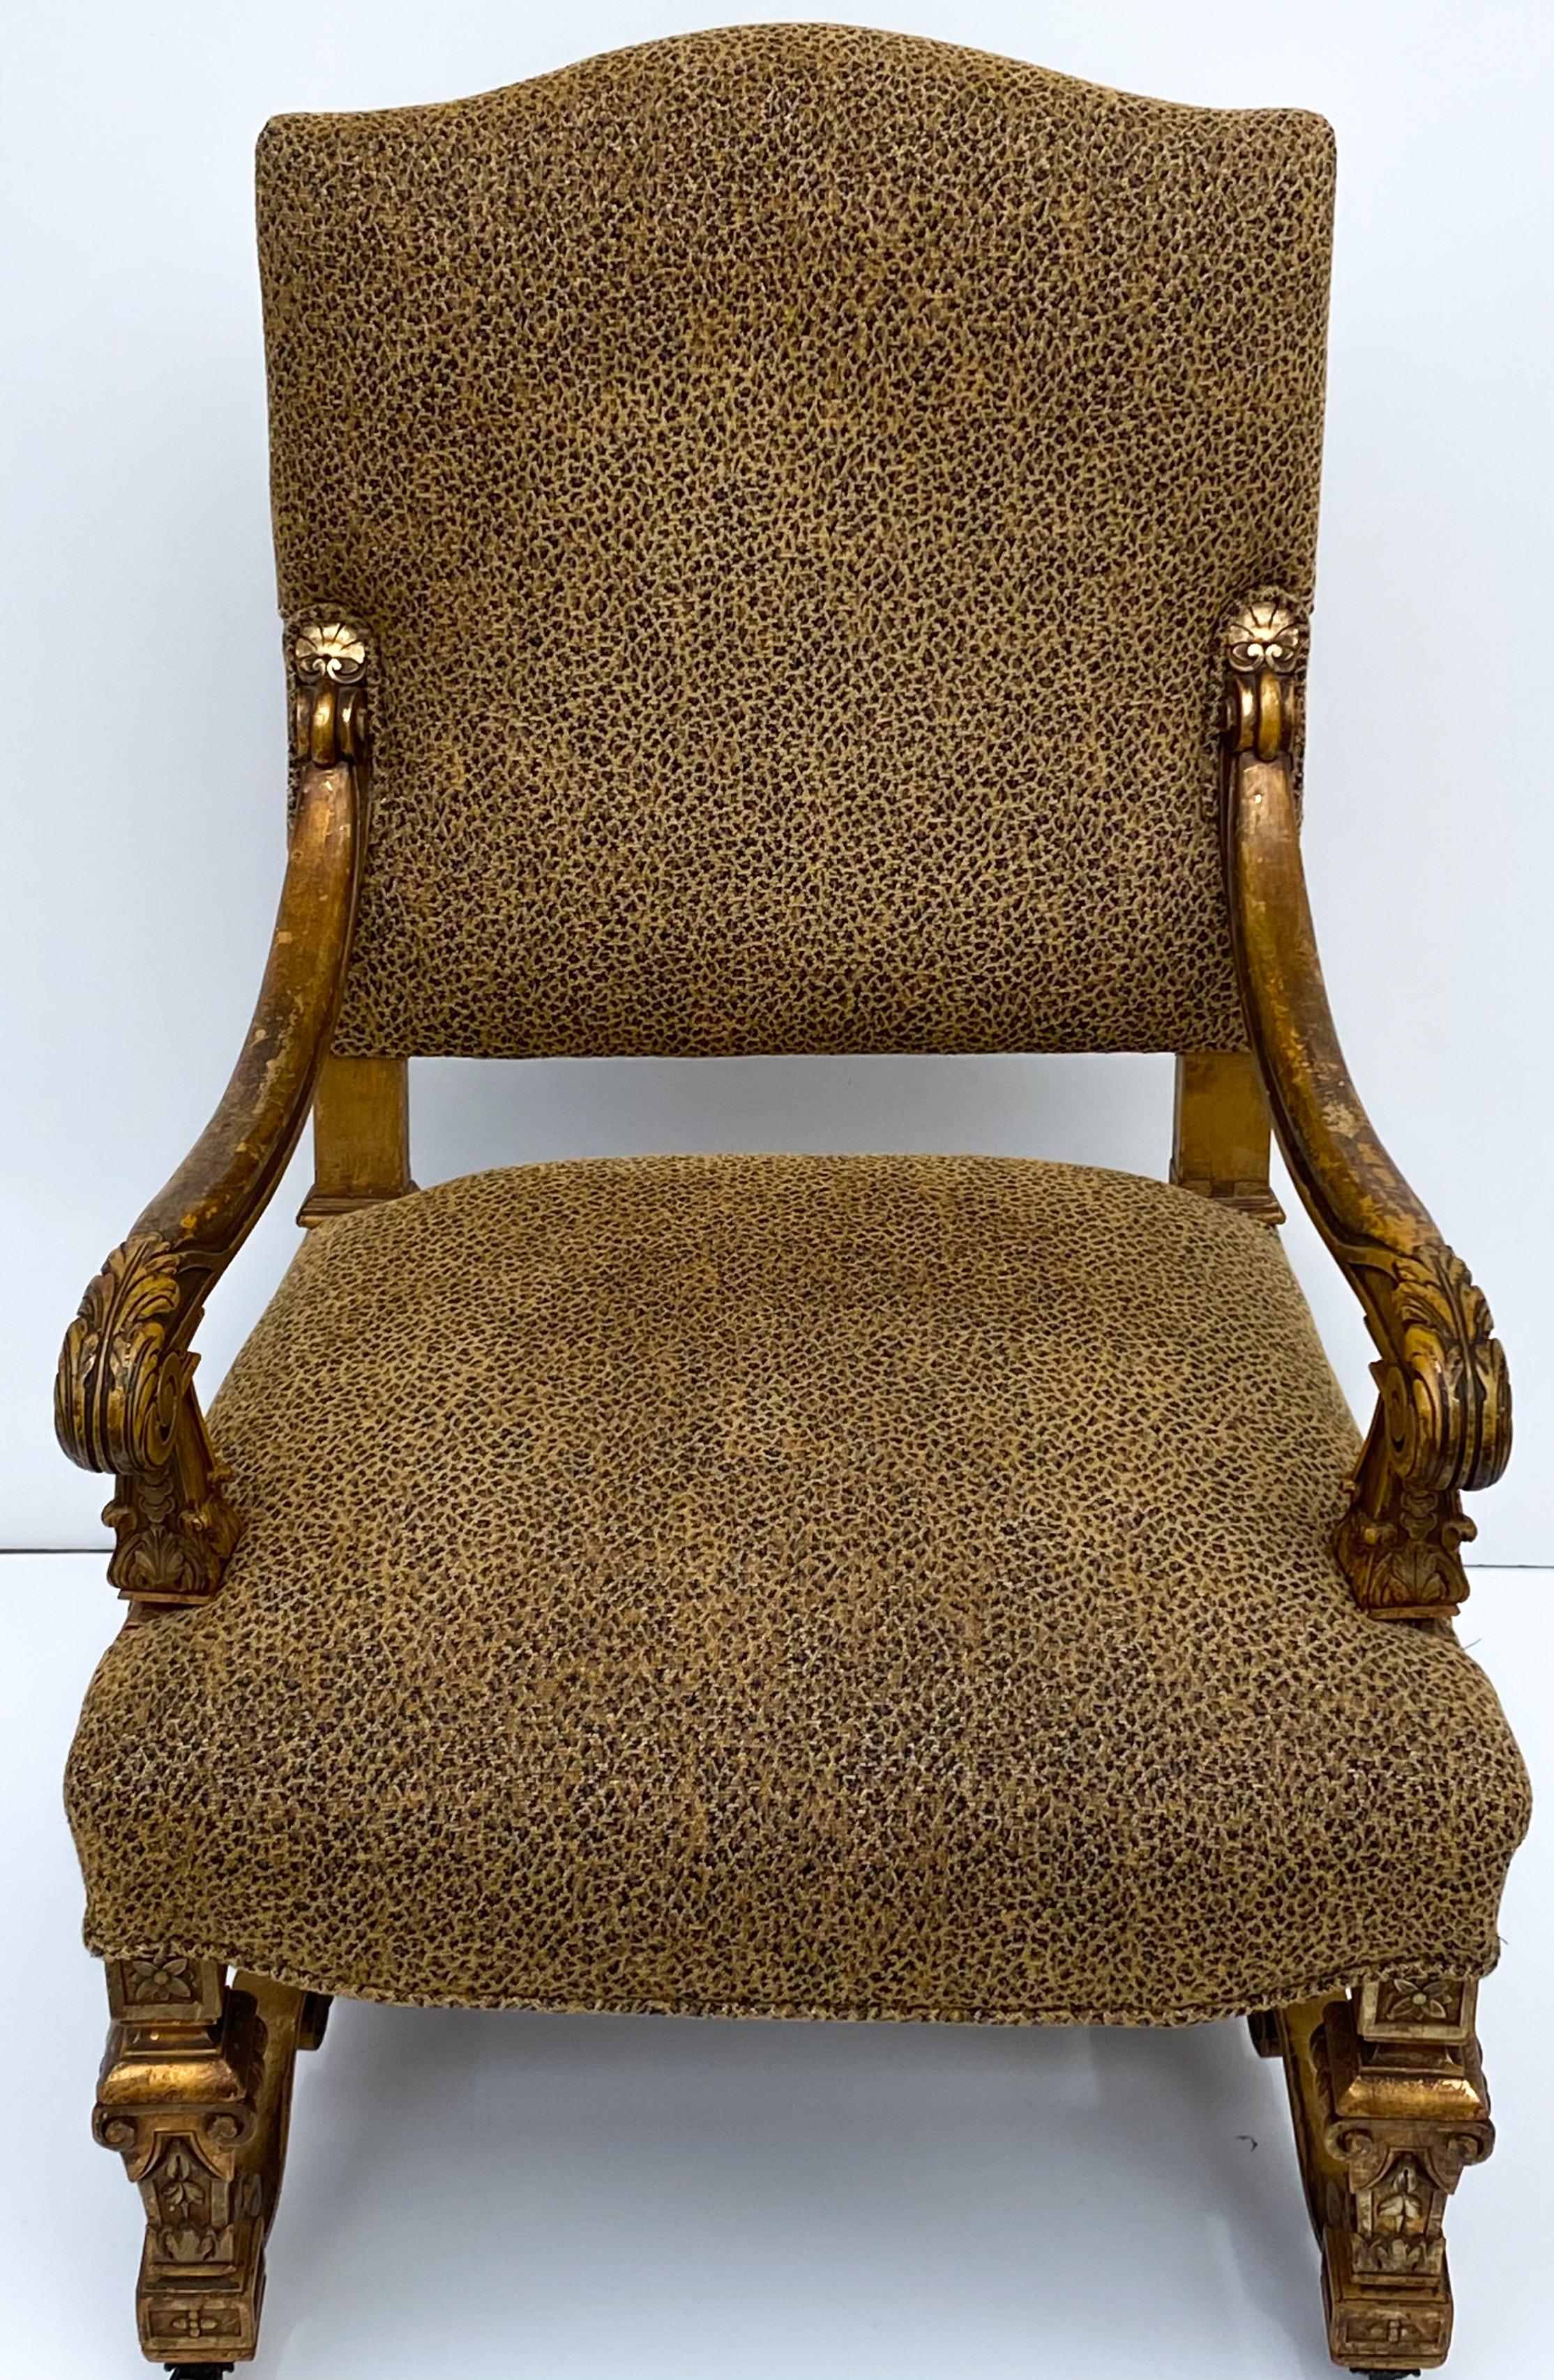 This is a 19th century, French Louis XIV style giltwood bergere chair in vintage leopard fabric. The frame is heavily carved with a shell cartouche on the cross stretcher. The legs have the original casters. It is unmarked.